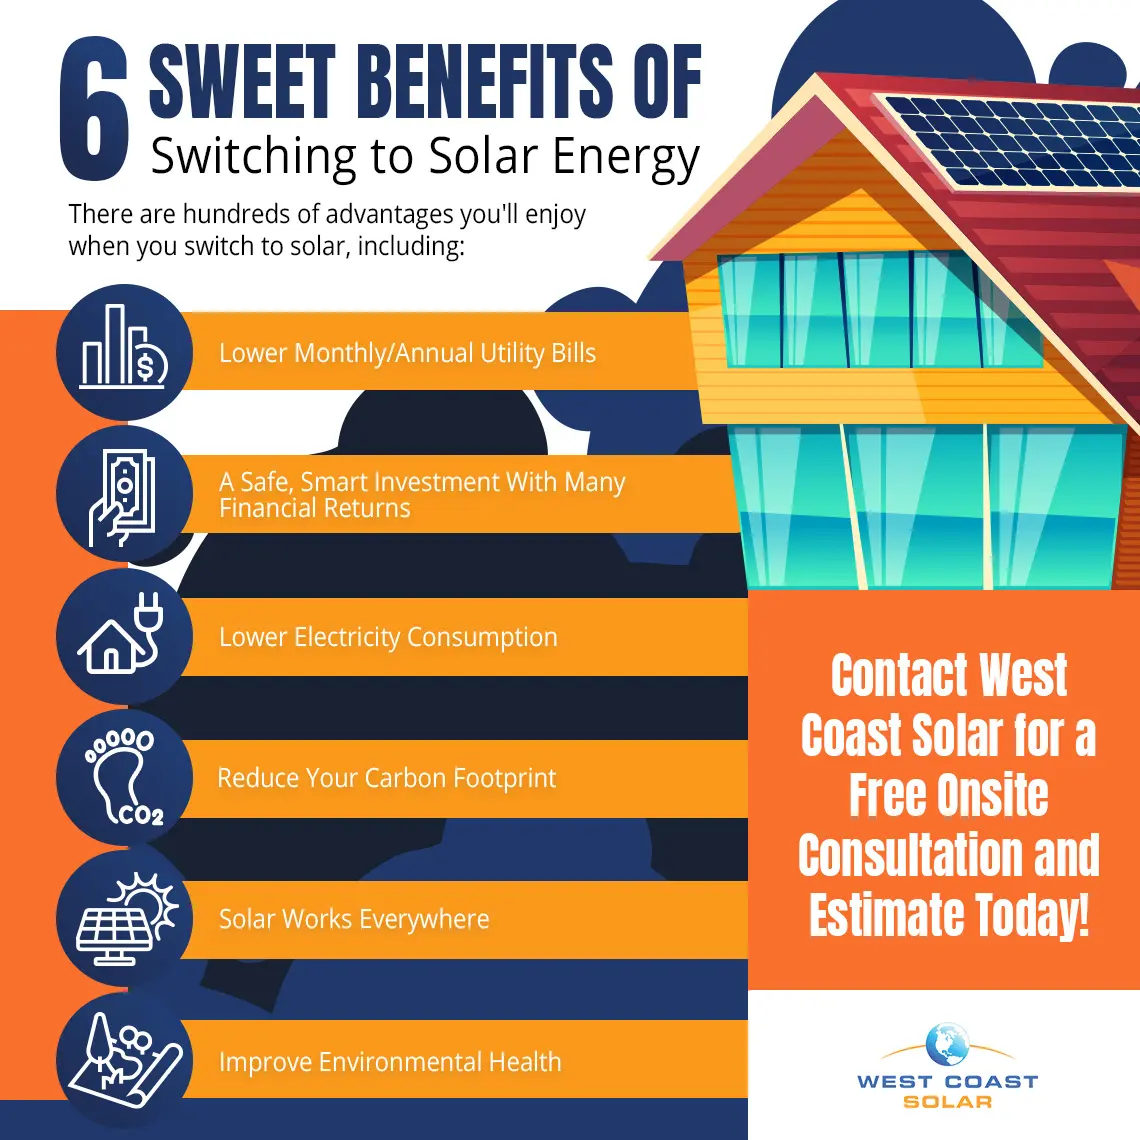 switch to solar energy - What do I need to know before switching to solar